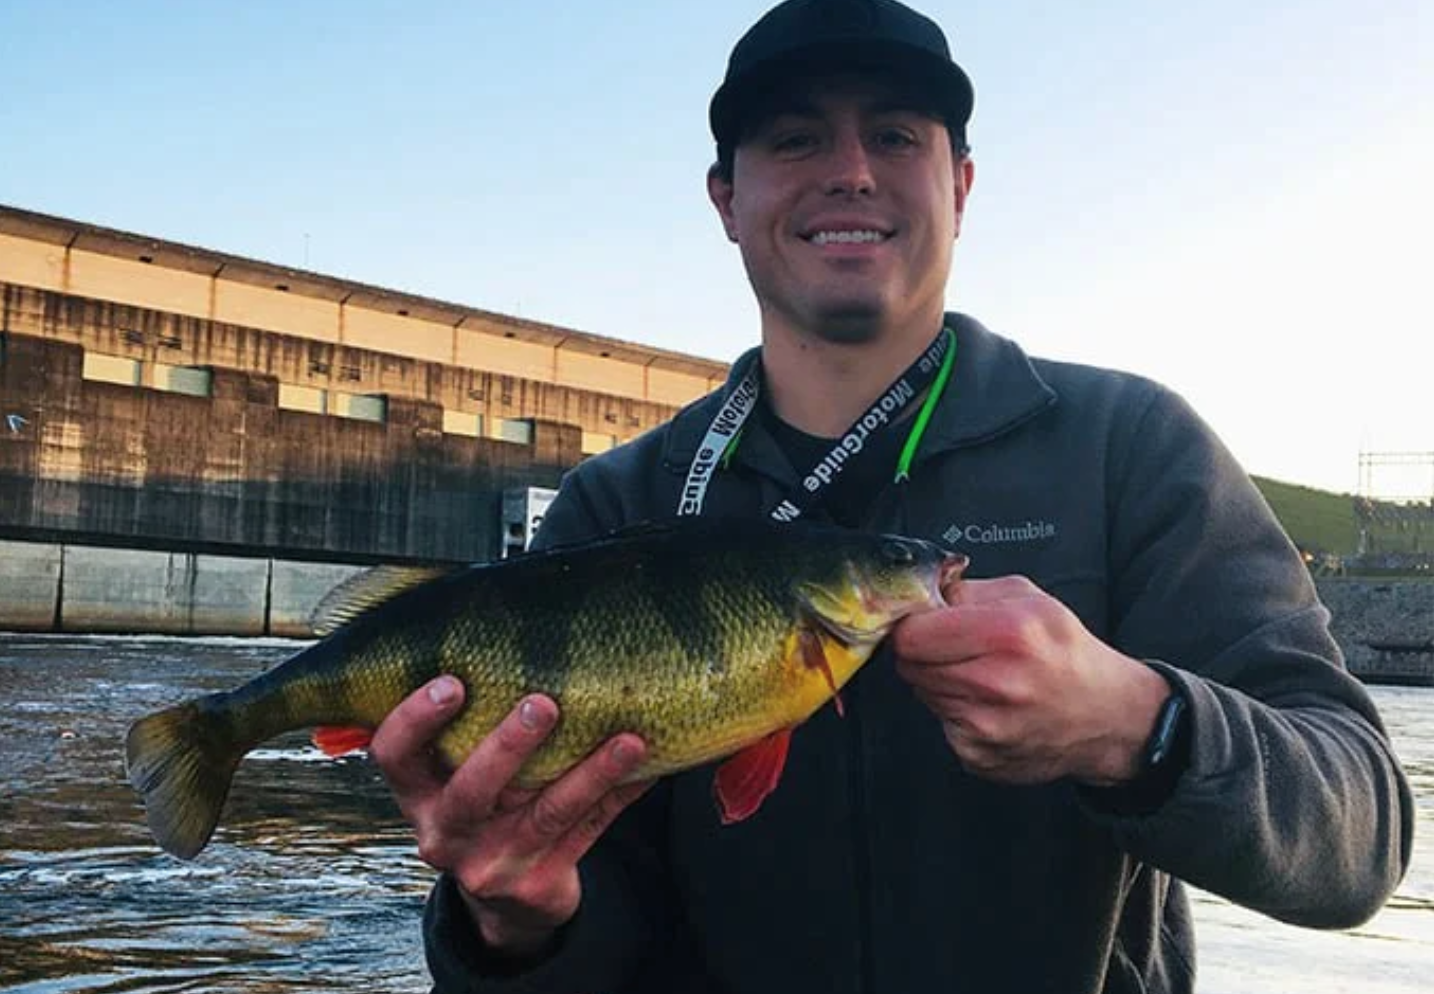 Georgia Angler Catches Giant, Almost-Record Yellow Perch